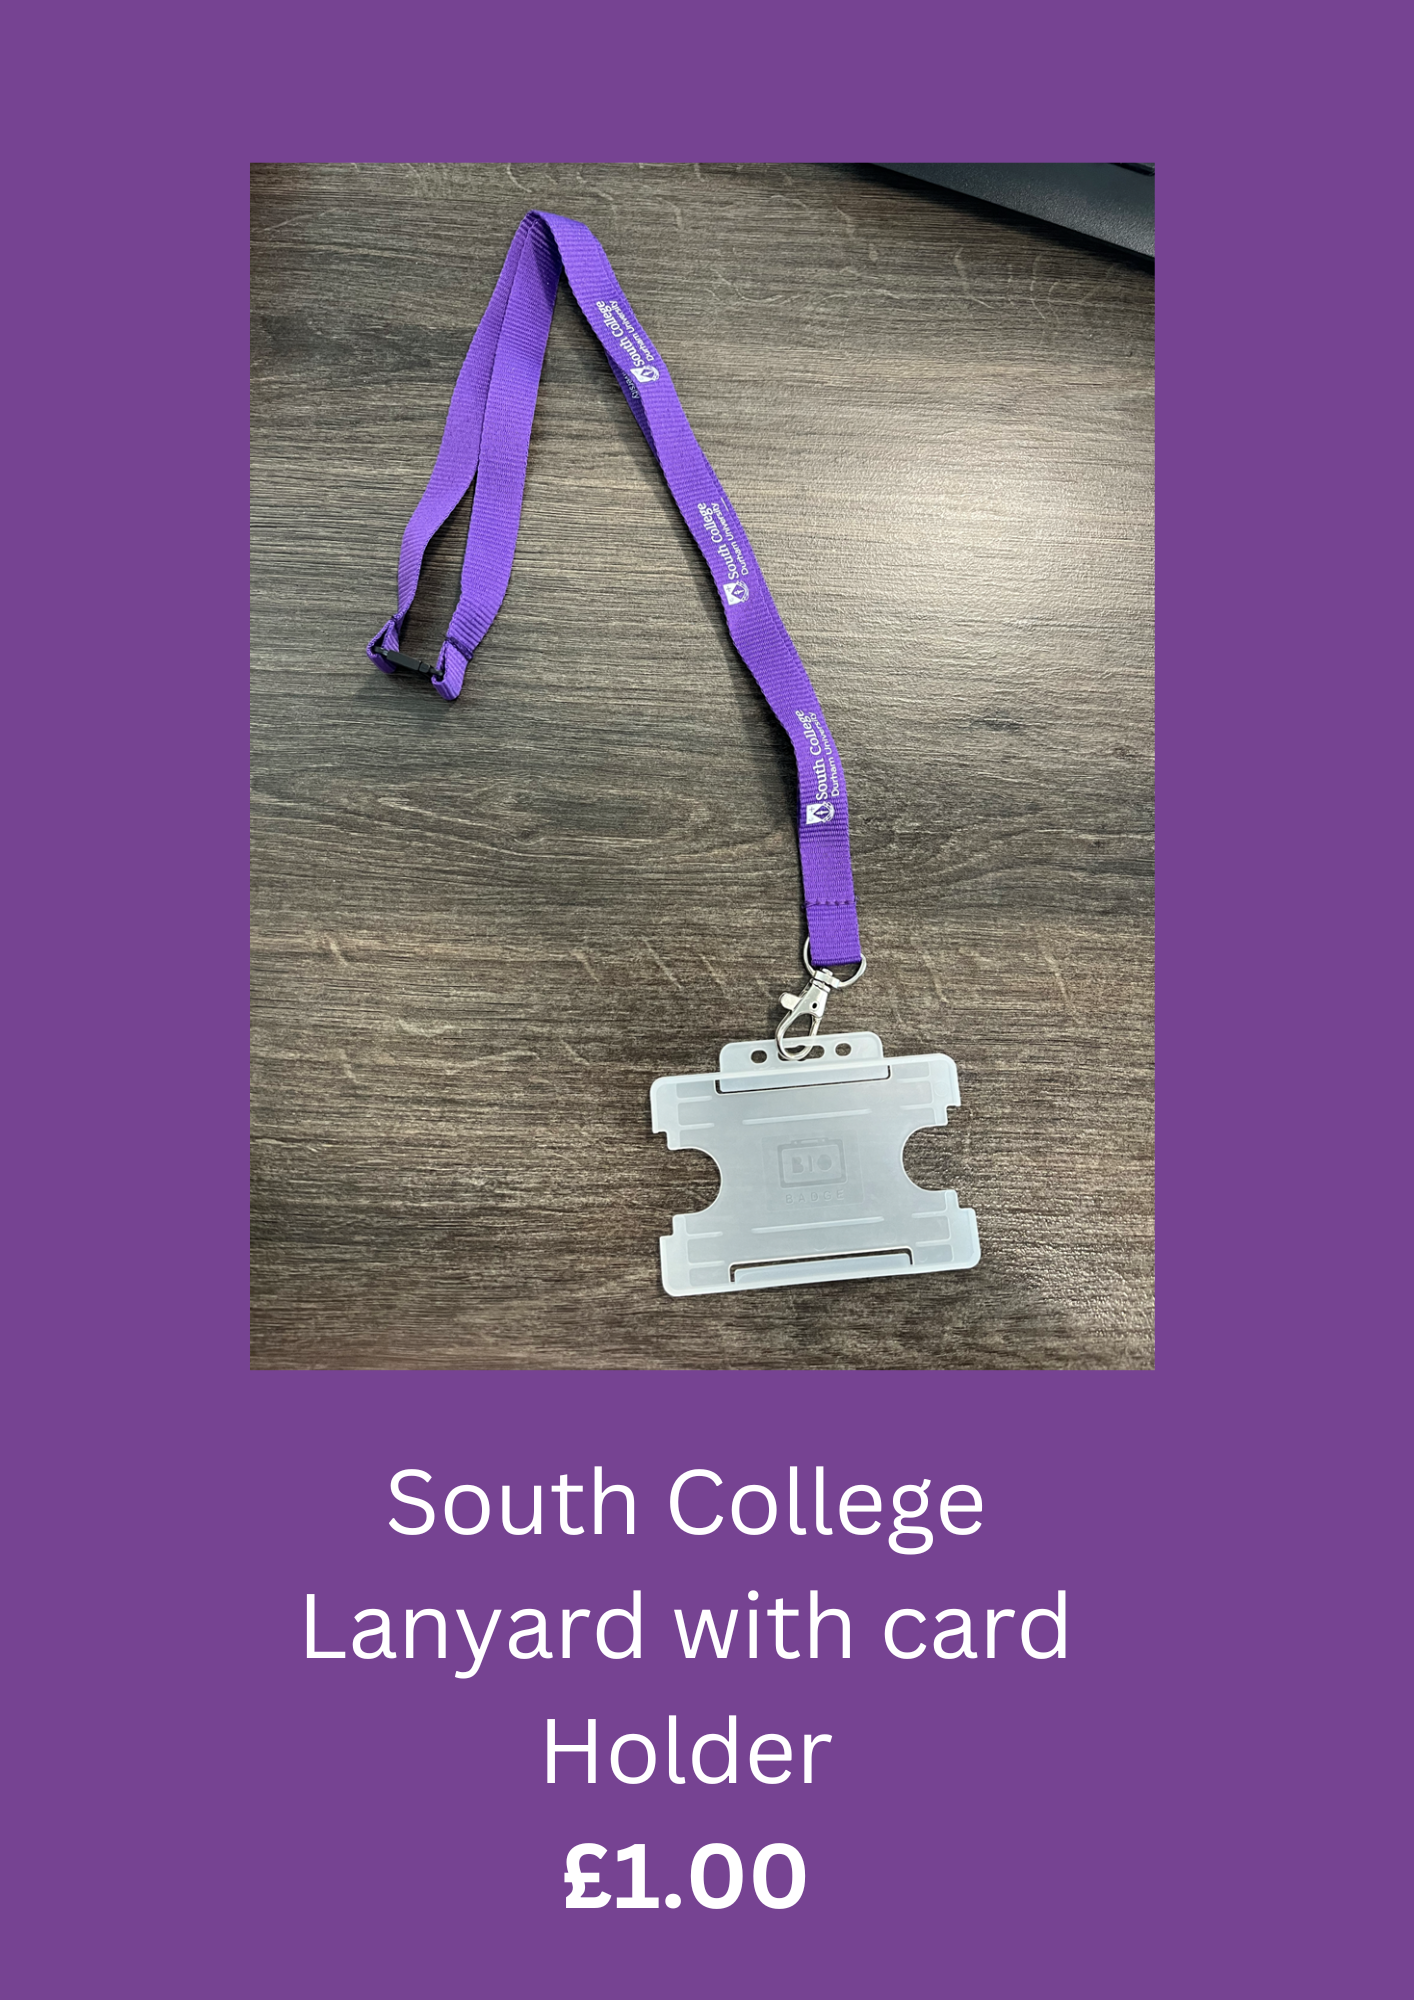 South College Lanyard with Card Holder